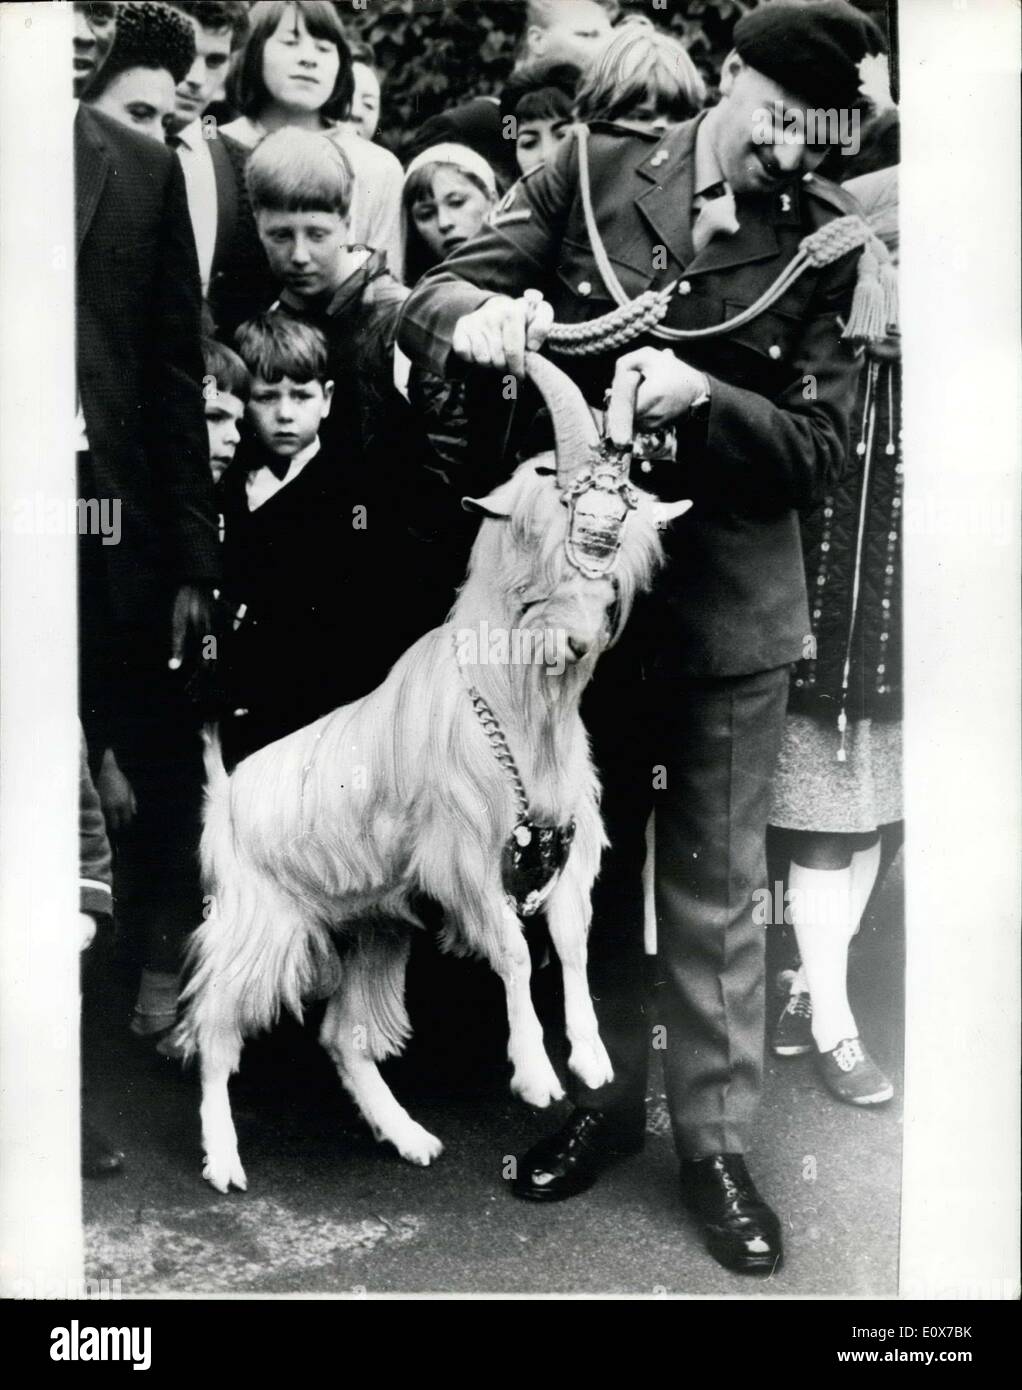 Aug. 25, 1965 - Goat mascot for the Royal Welch Fusiliers. Lt. Peter Reece, of the 1st. Battalion of the Royal Welch Fusiliers, Stock Photo